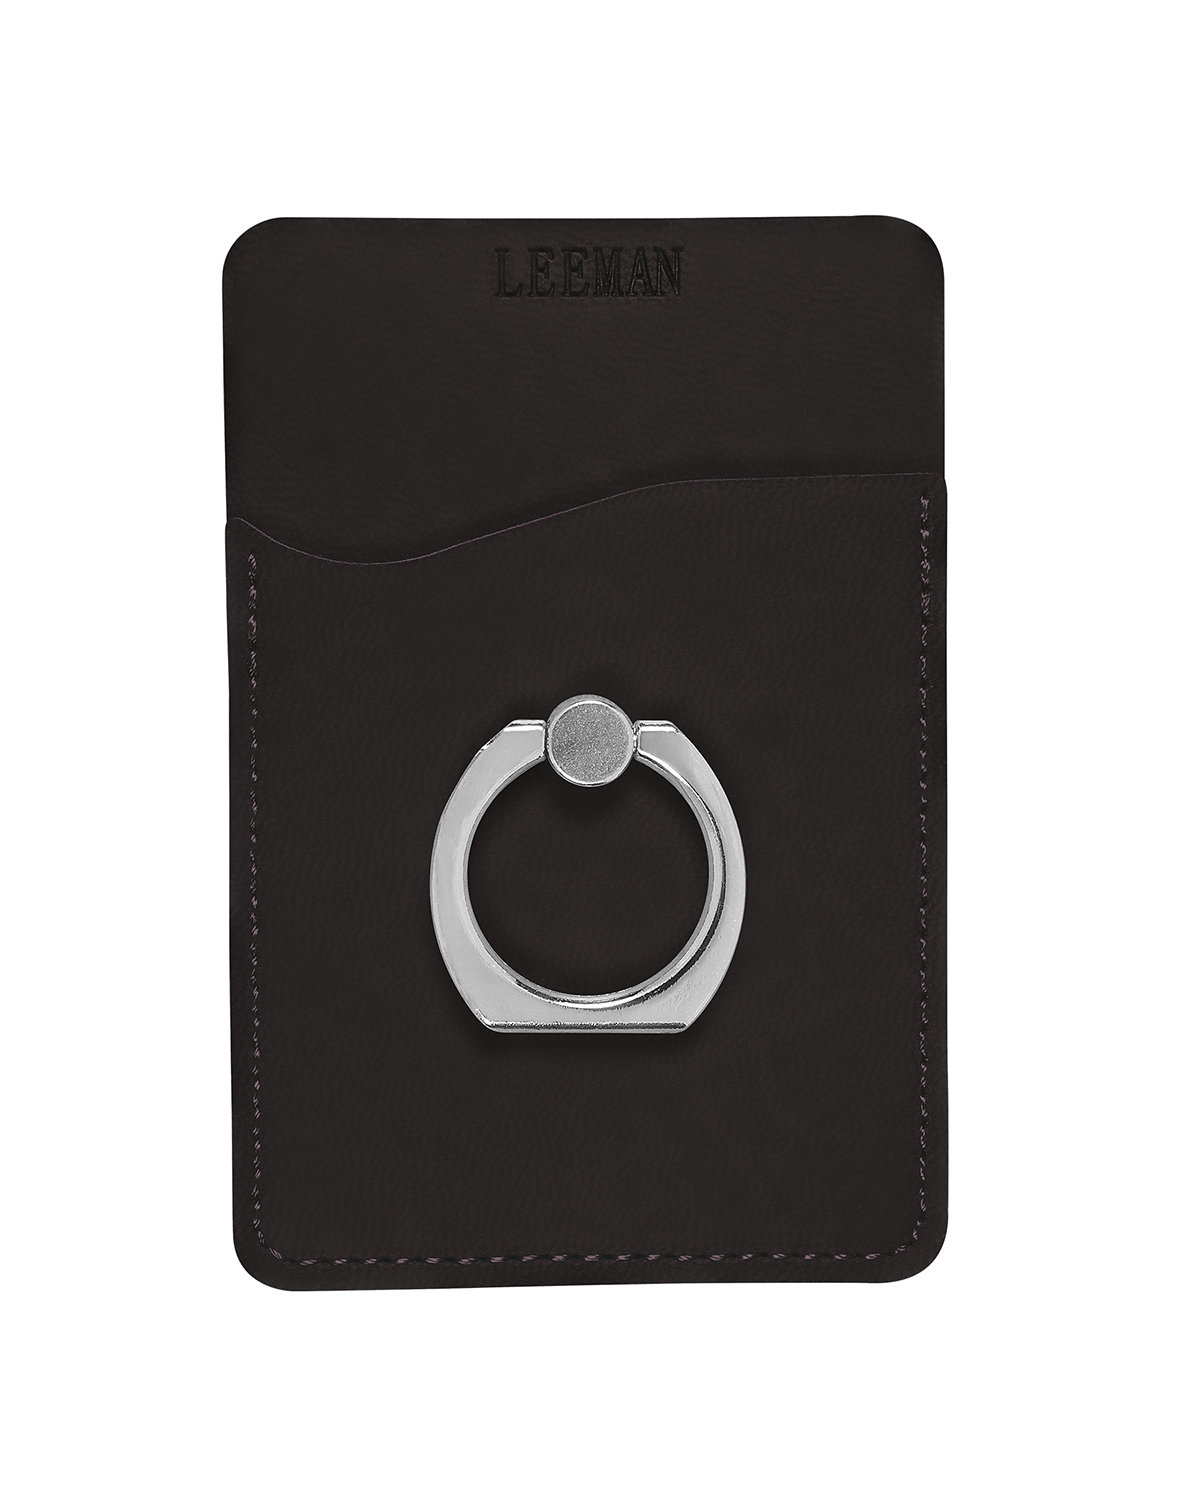 Leeman Tuscany™ Card Holder With Metal Ring Phone Stand black 